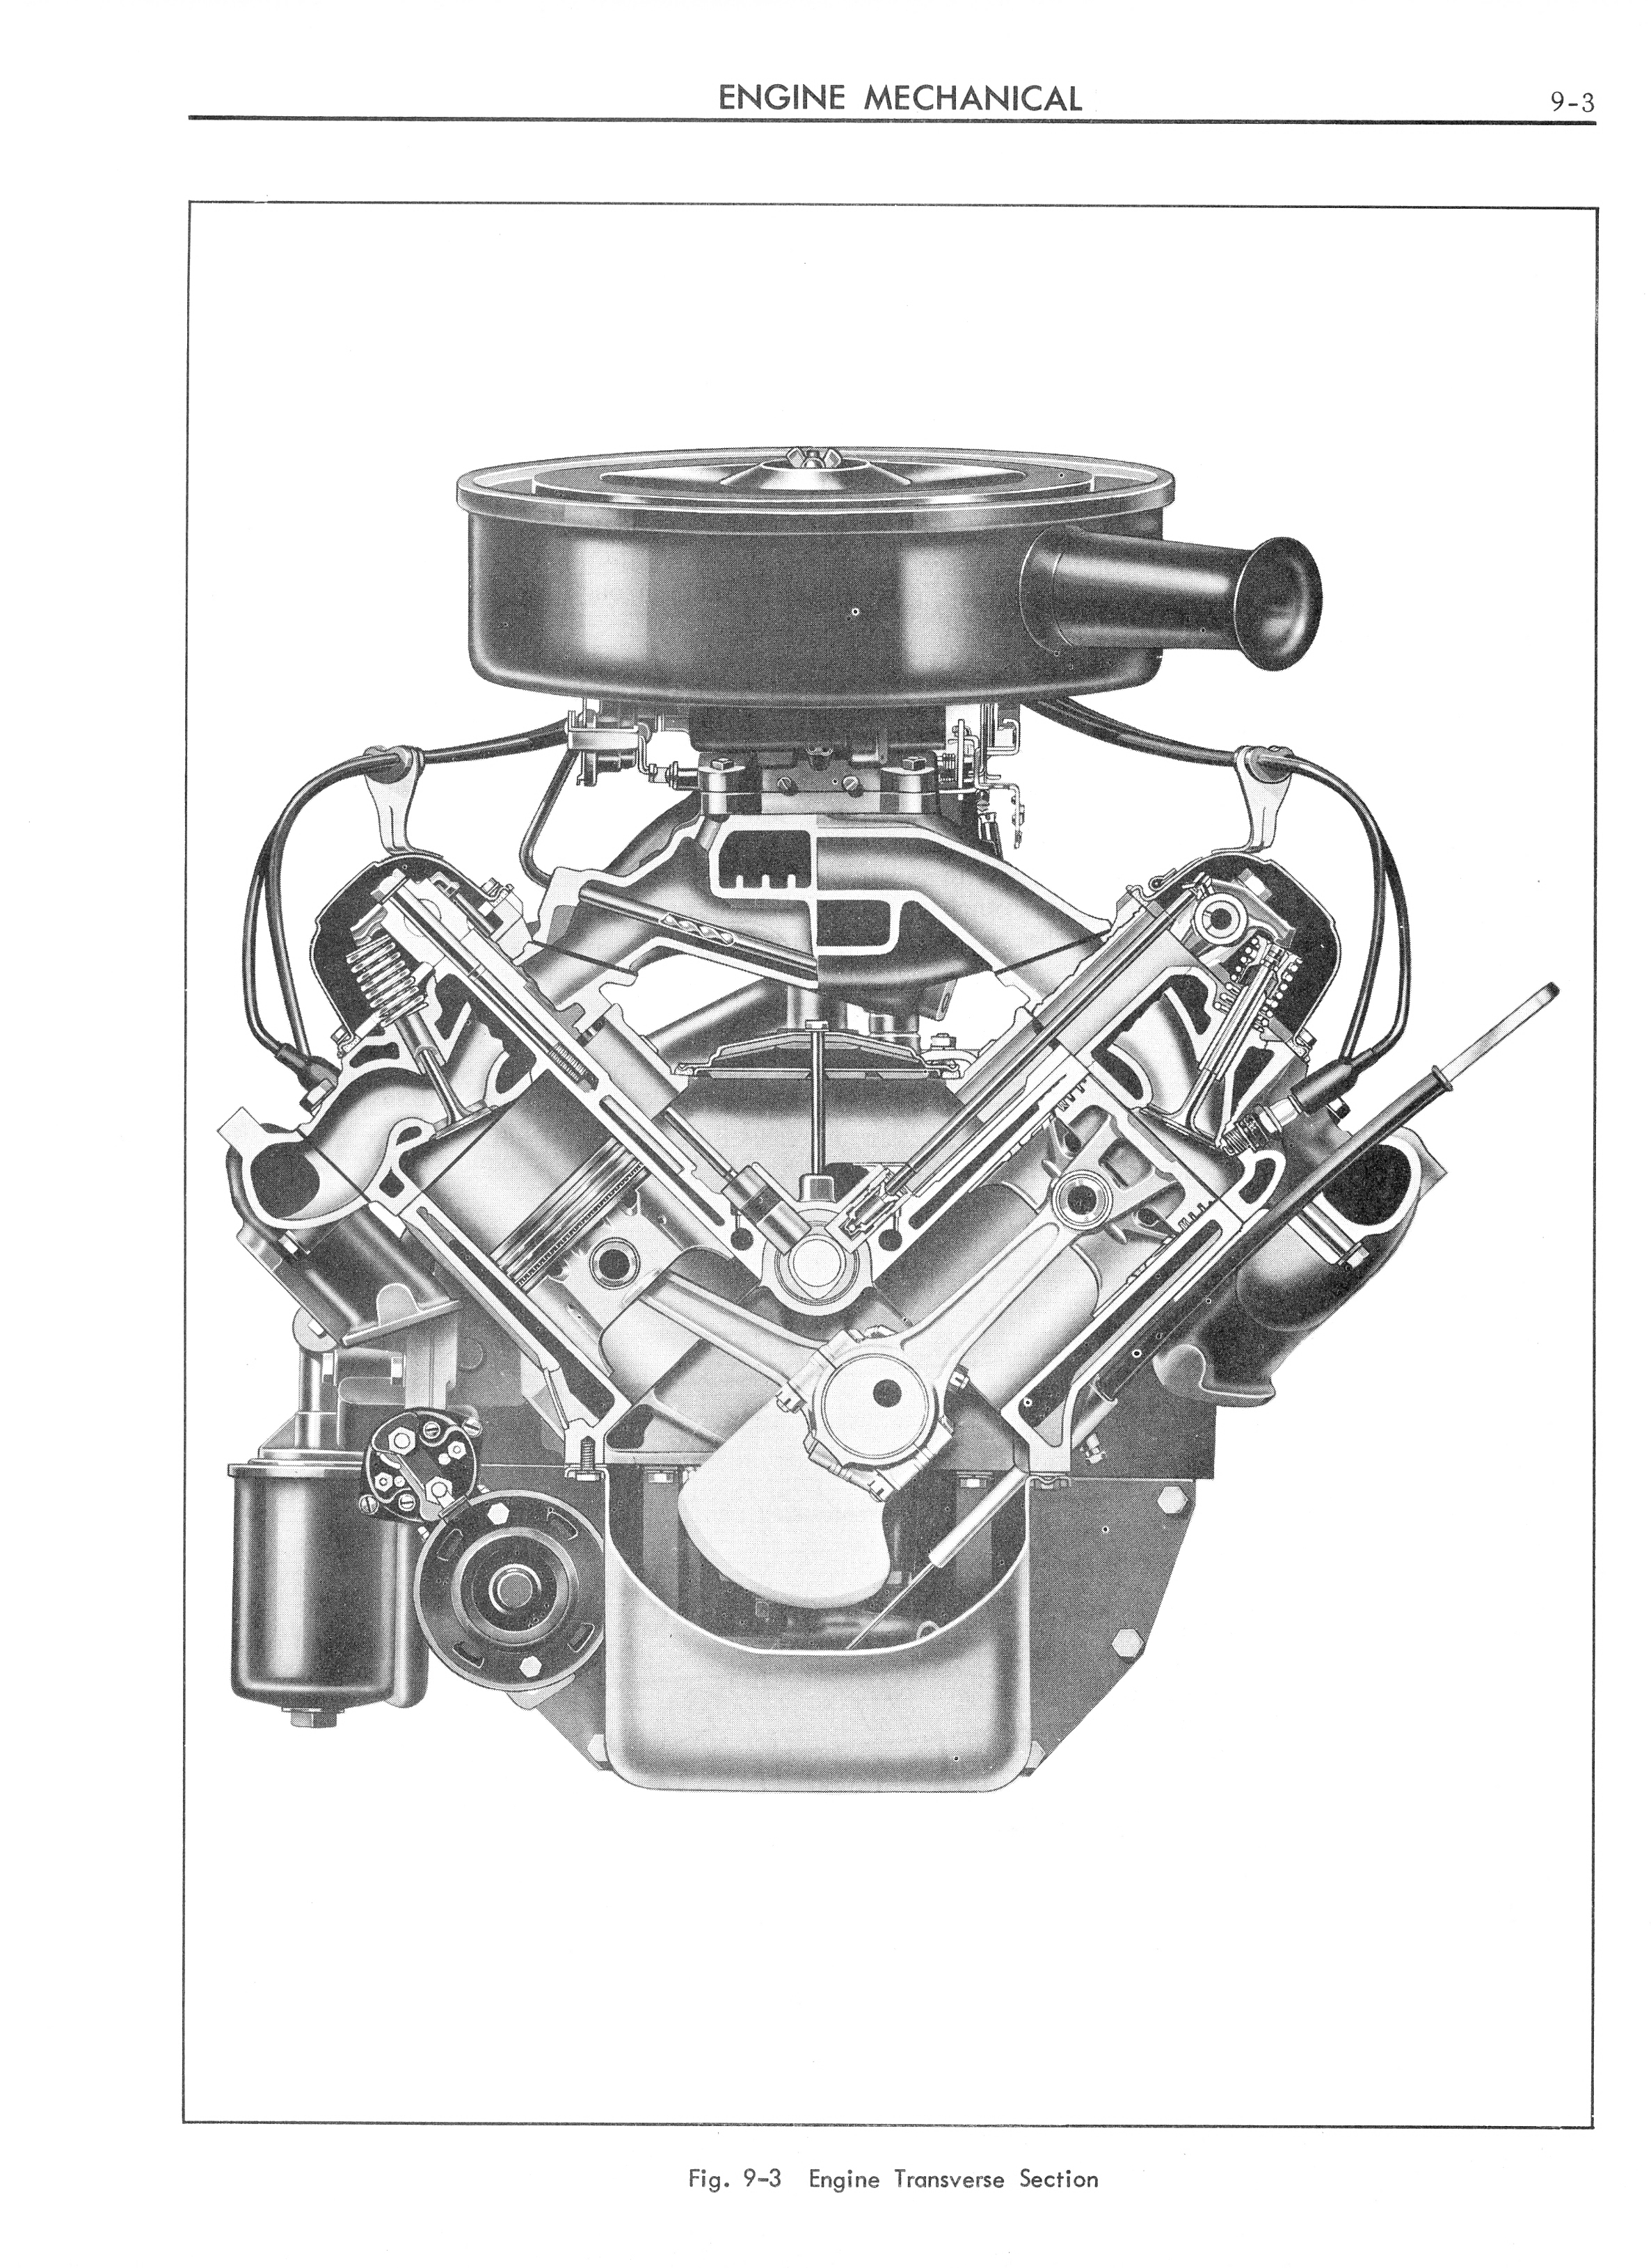 1962 Cadillac Shop Manual - Engine Mechanical Page 3 of 32